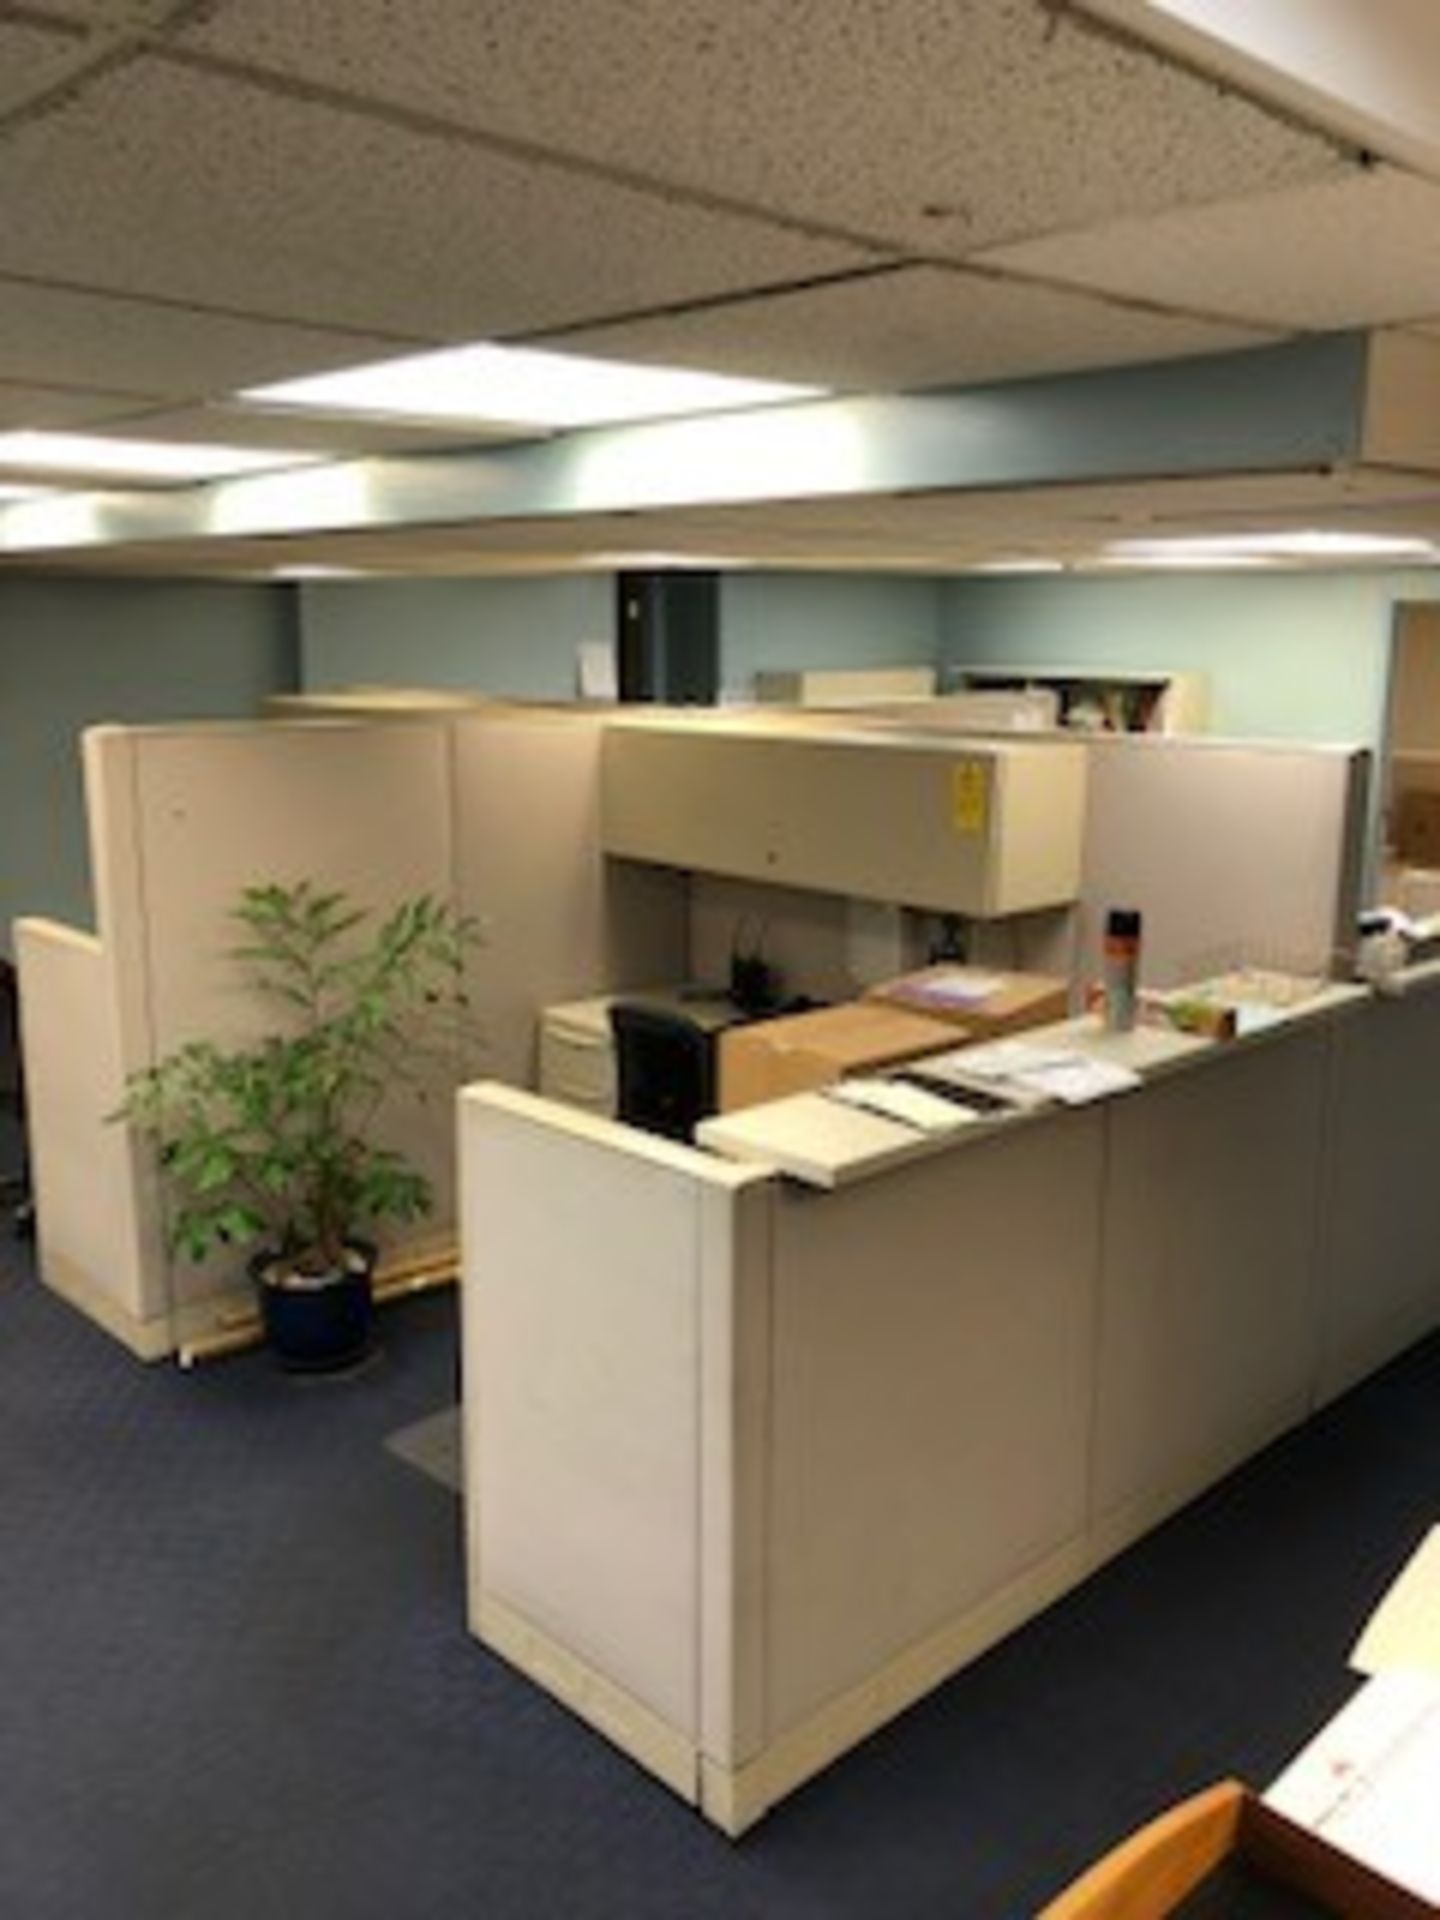 Lot Office: Desks, Chairs, Partitions, File Cabinets - Image 8 of 9